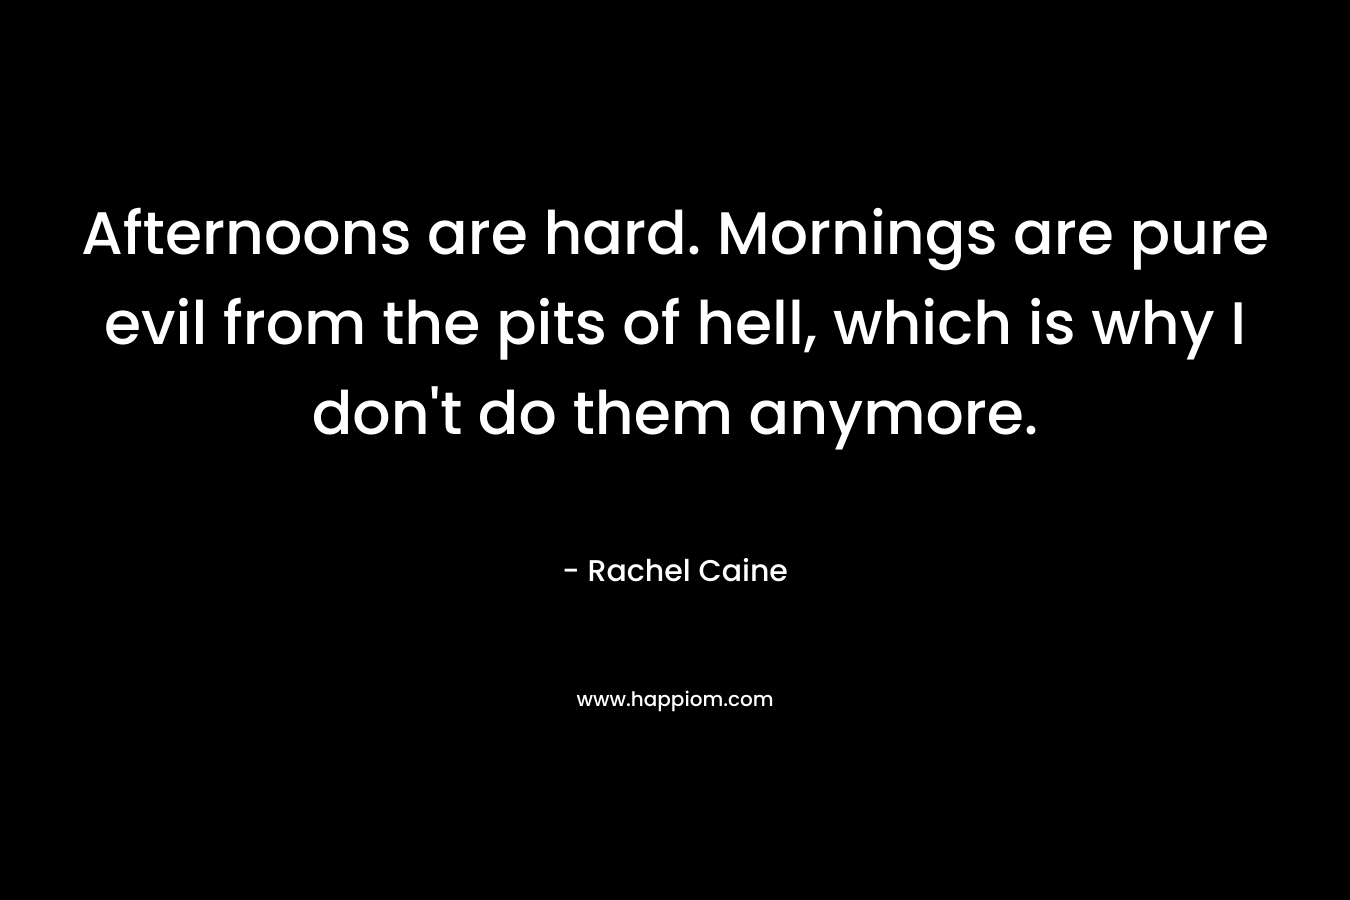 Afternoons are hard. Mornings are pure evil from the pits of hell, which is why I don’t do them anymore. – Rachel Caine